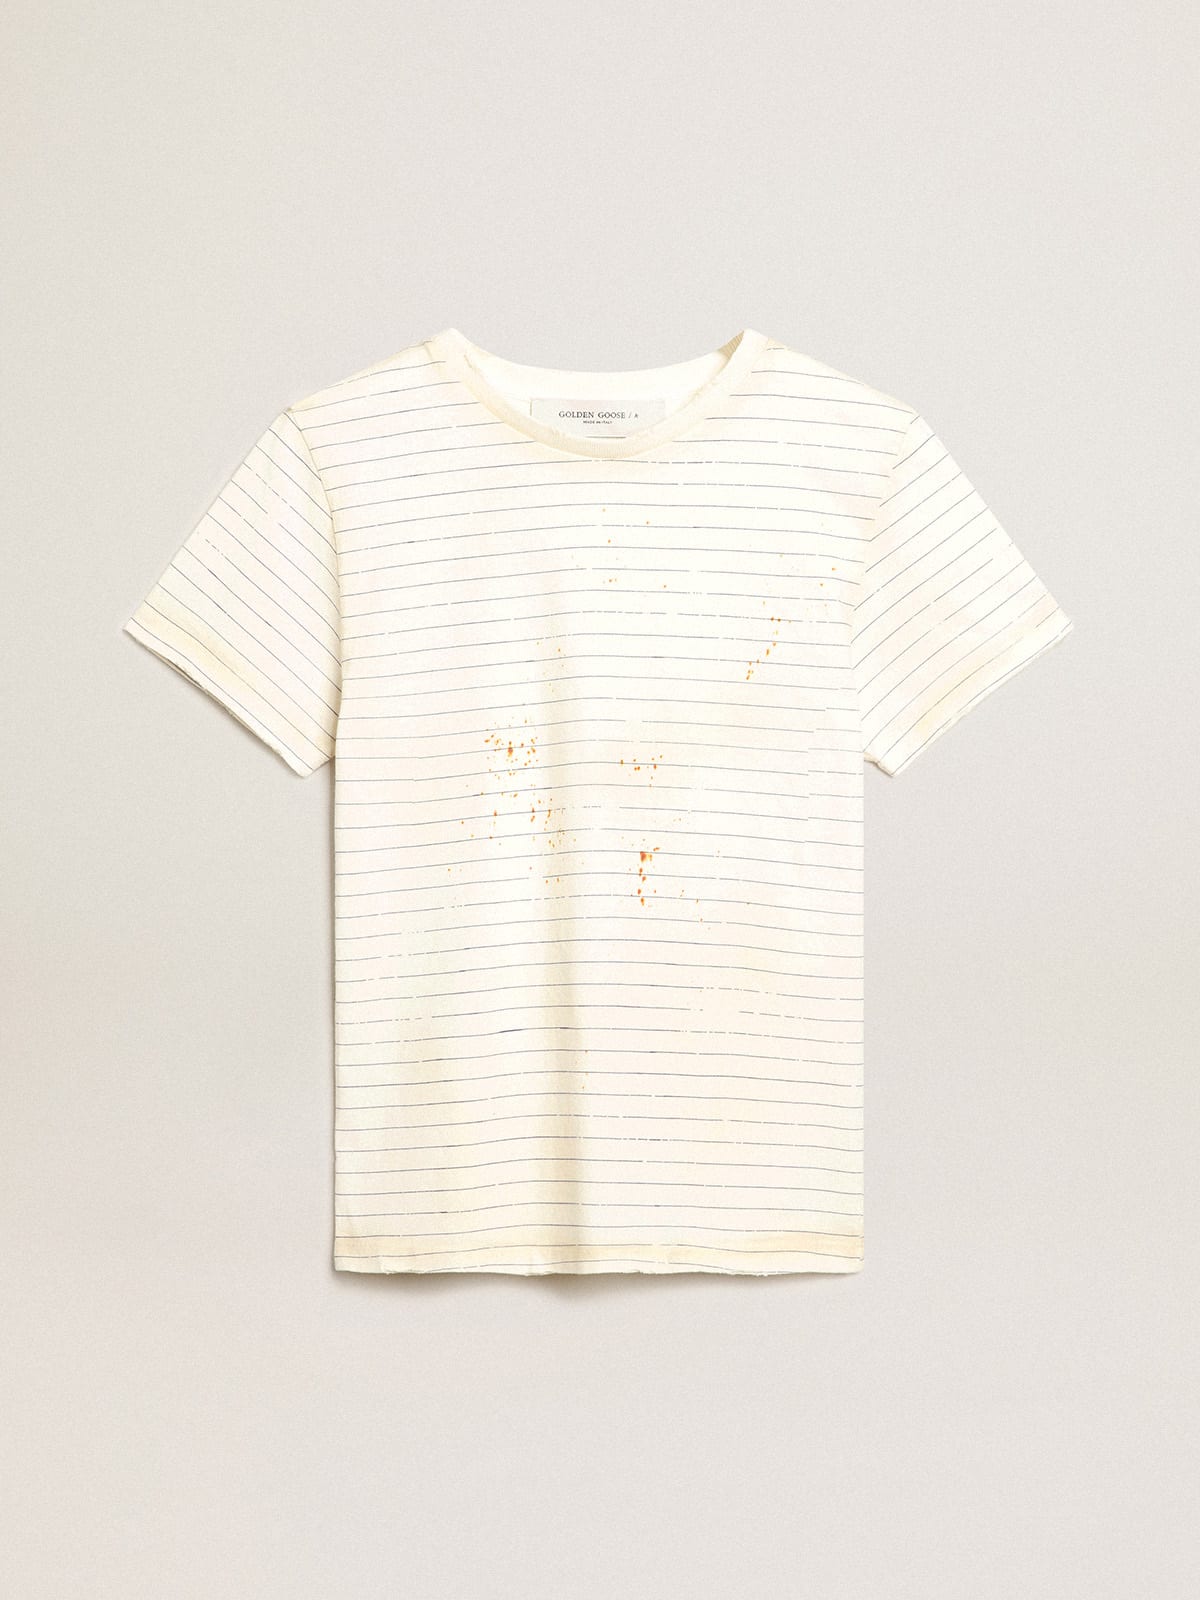 White T-shirt with vintage notebook effect